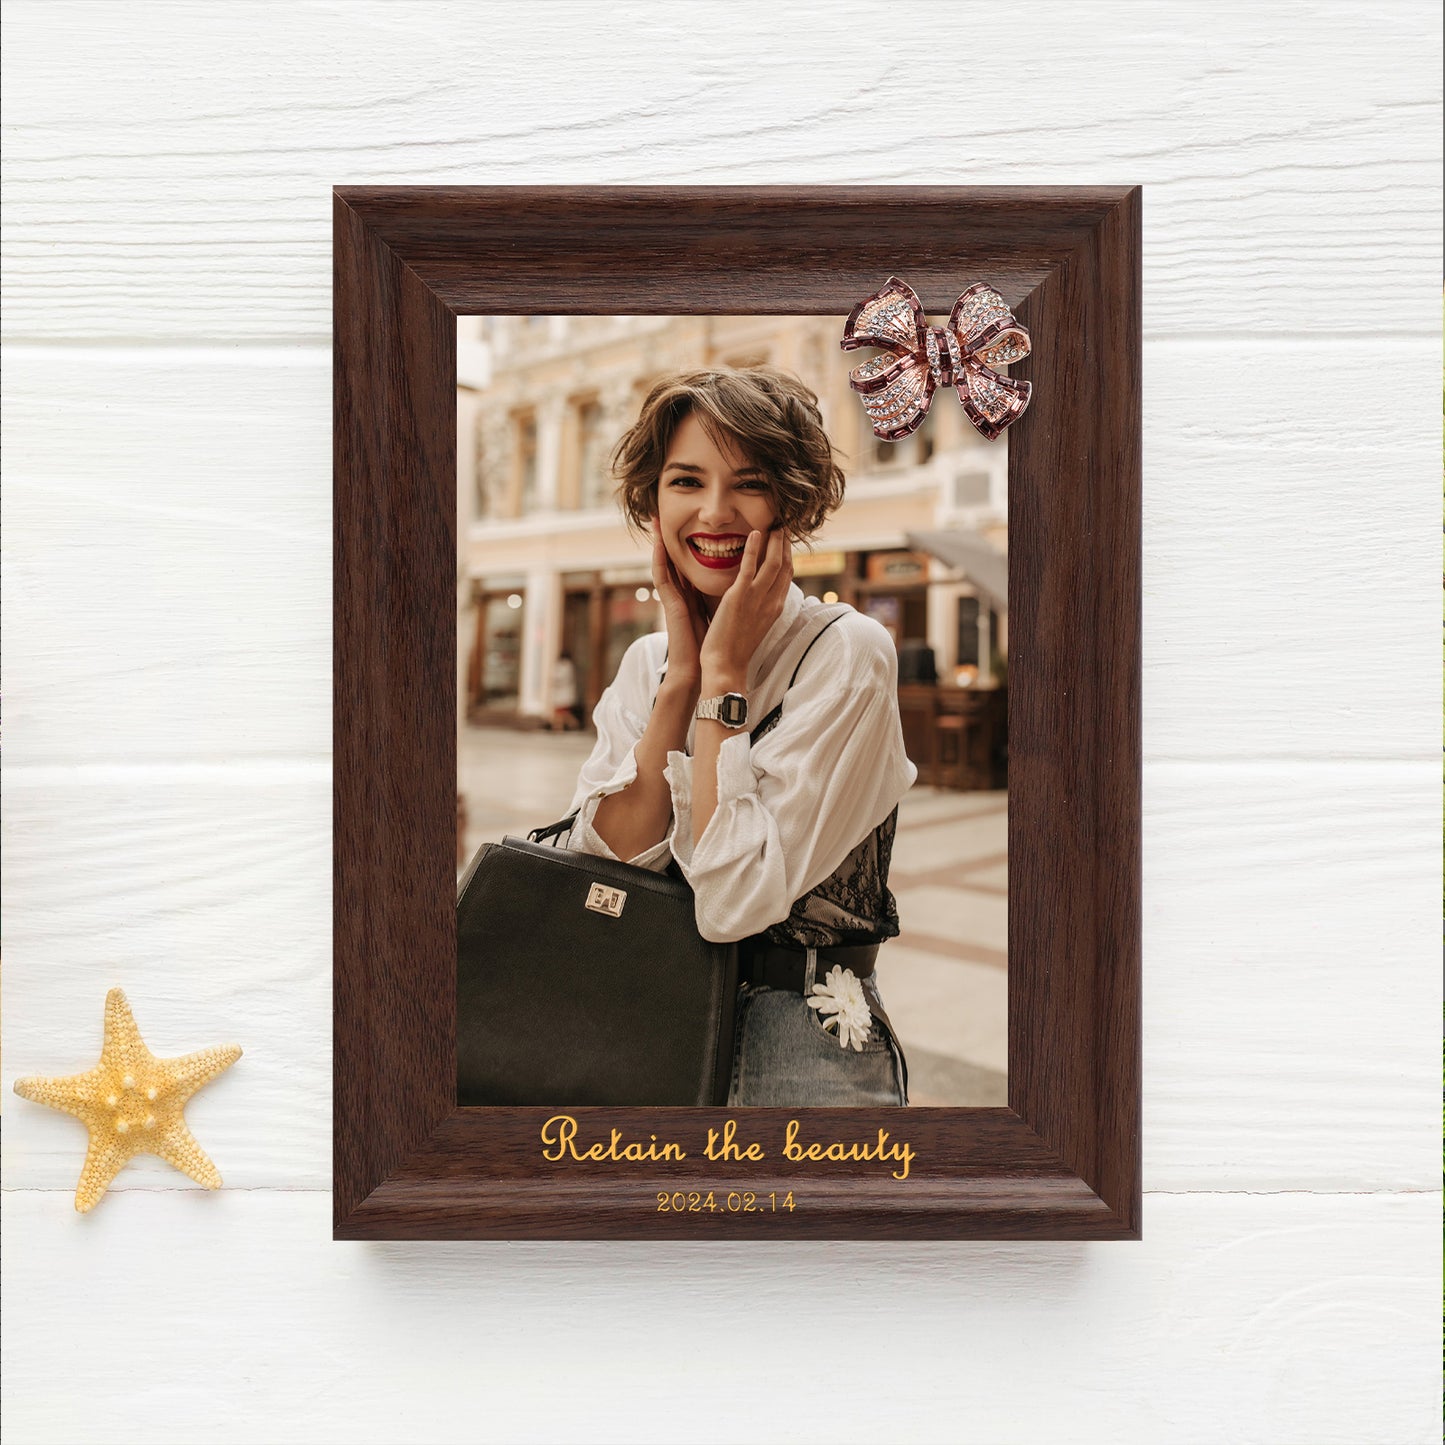 Decoration Photo Frame Dotride Custom Picture Frame, Wood Photo Frame with Custom Wooden Carving, Can be engraved with any text you want, suitable for Suitable for Various Themes, Bow Brown